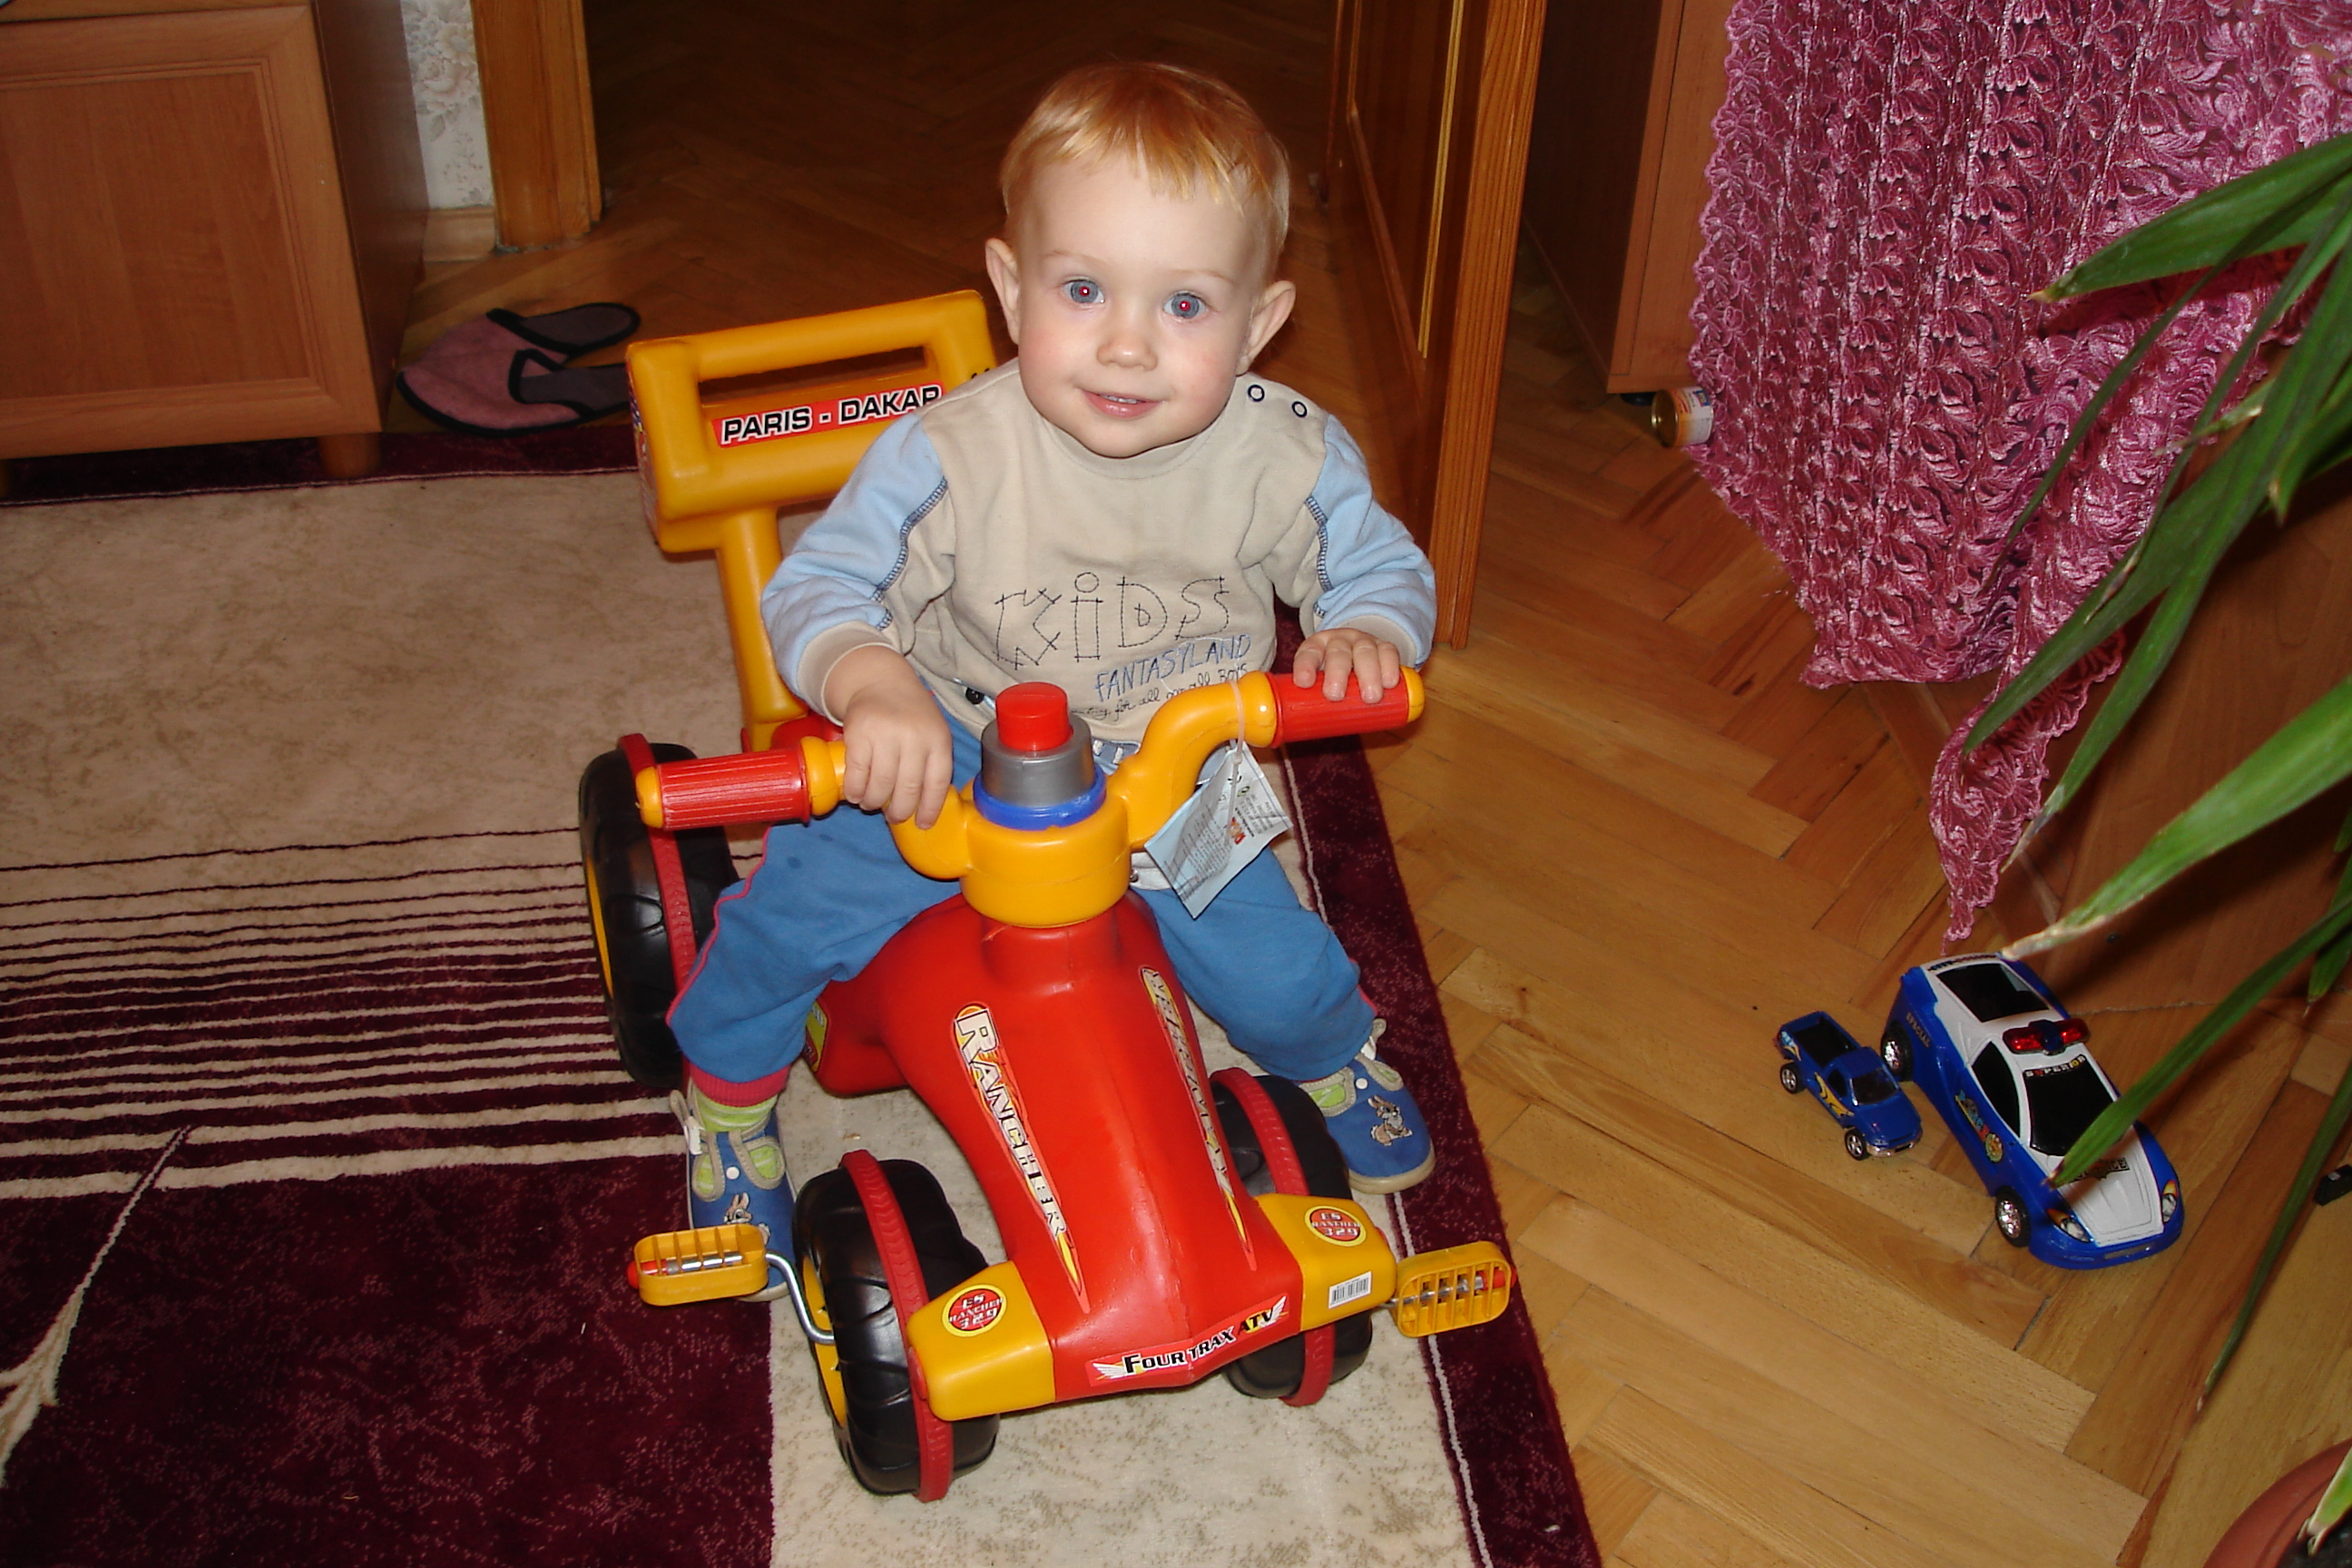 A small boy on a plastic bicycle.